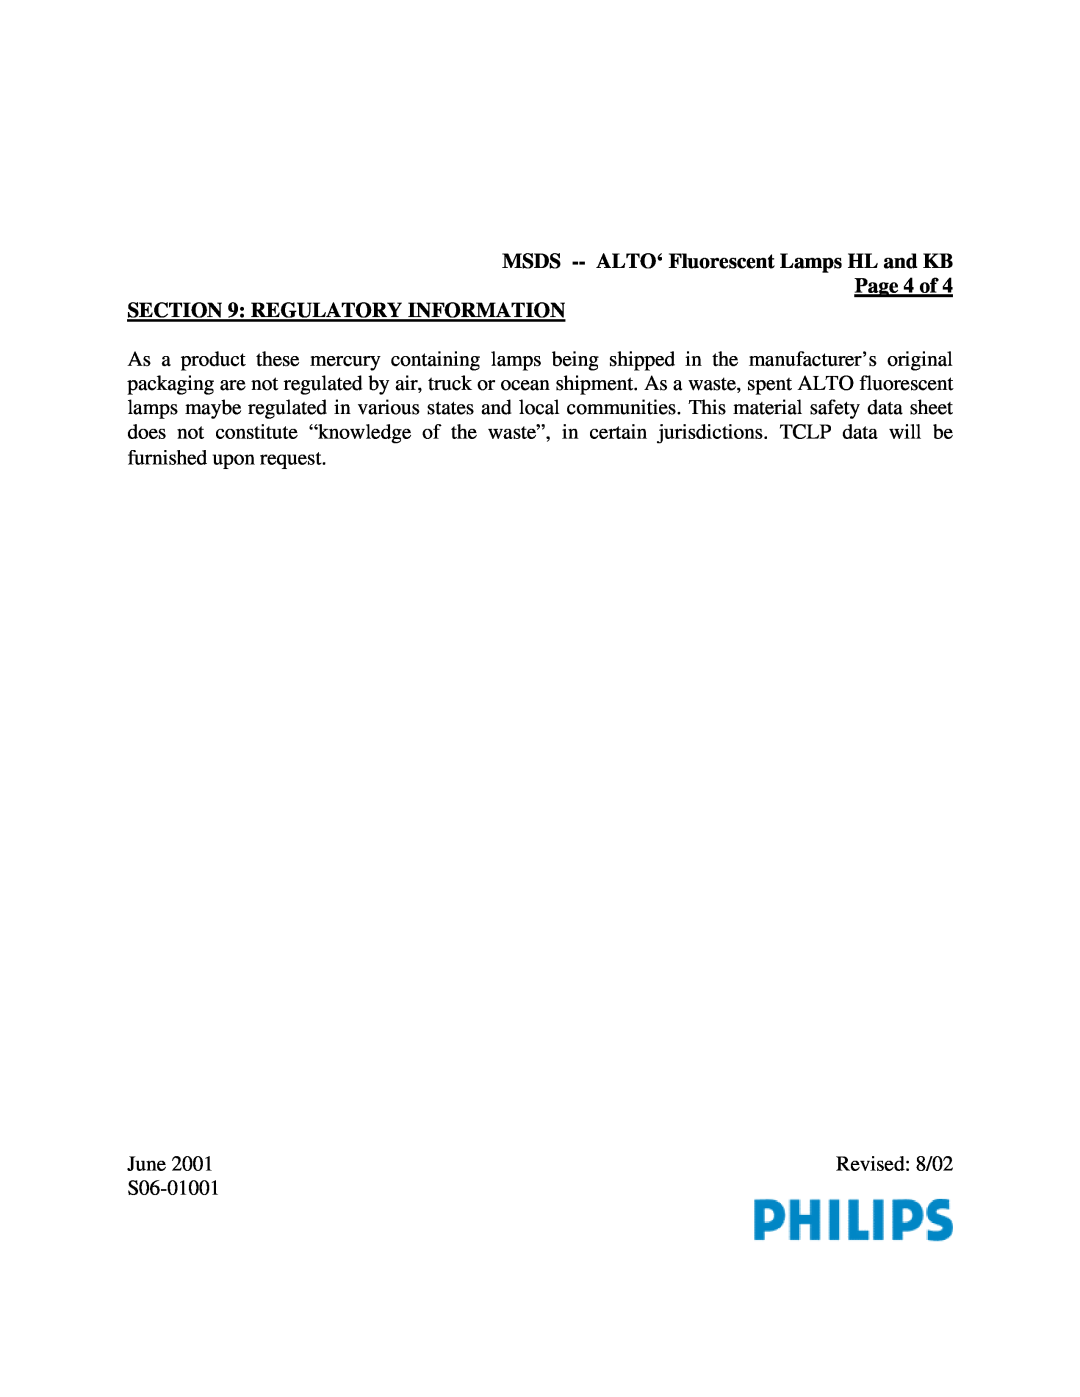 Philips S06-01001 manual Page 4 of REGULATORY INFORMATION, MSDS --ALTO‘ Fluorescent Lamps HL and KB 